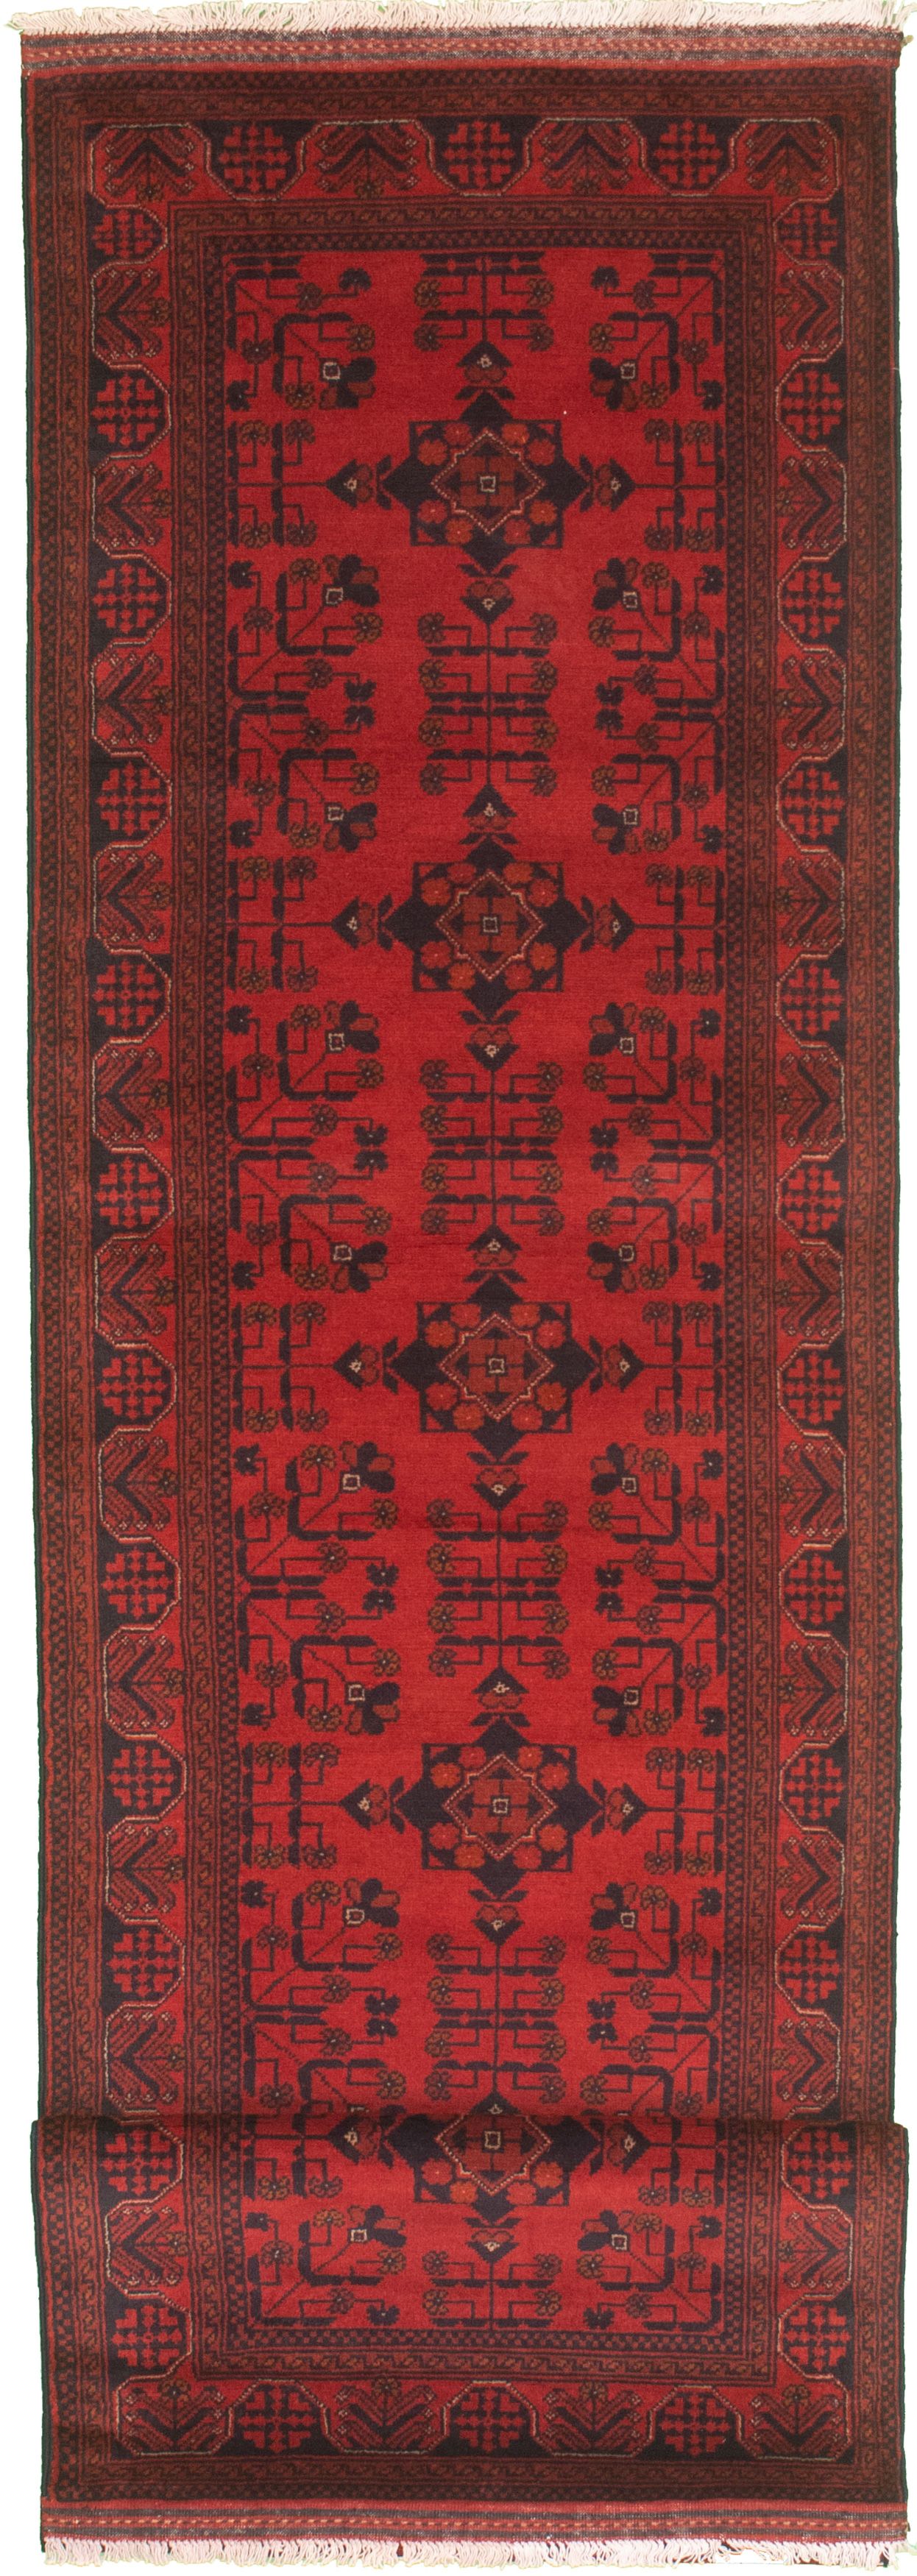 Hand-knotted Finest Khal Mohammadi Red Wool Rug 2'8" x 12'4" Size: 2'8" x 12'4"  